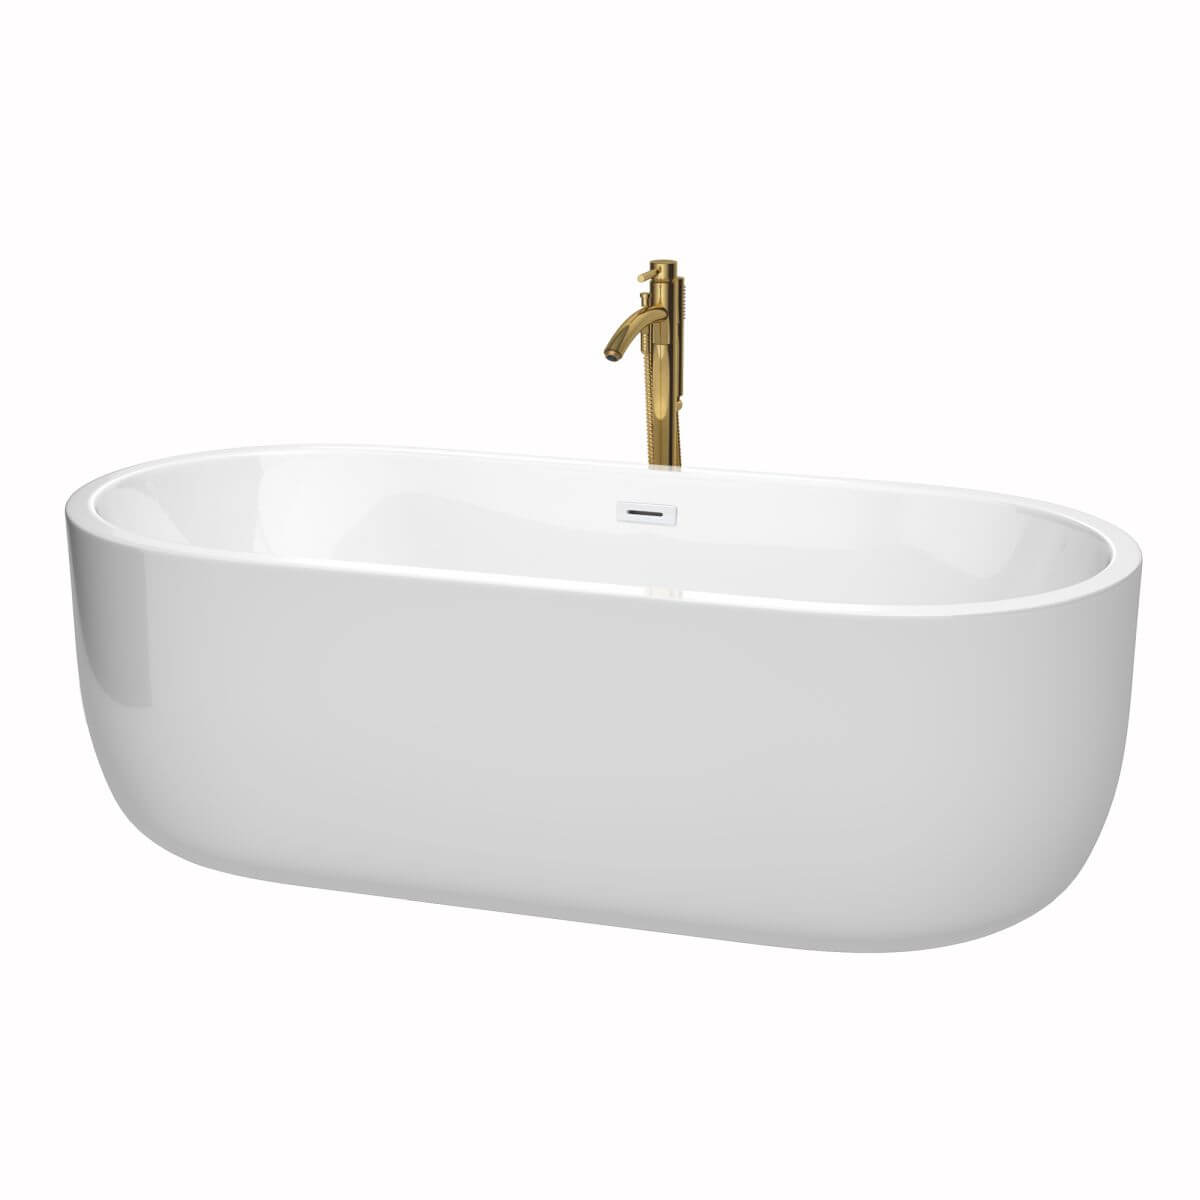 Wyndham Collection Juliette 71 inch Freestanding Bathtub in White with Shiny White Trim and Floor Mounted Faucet in Brushed Gold - WCOBT101371SWATPGD